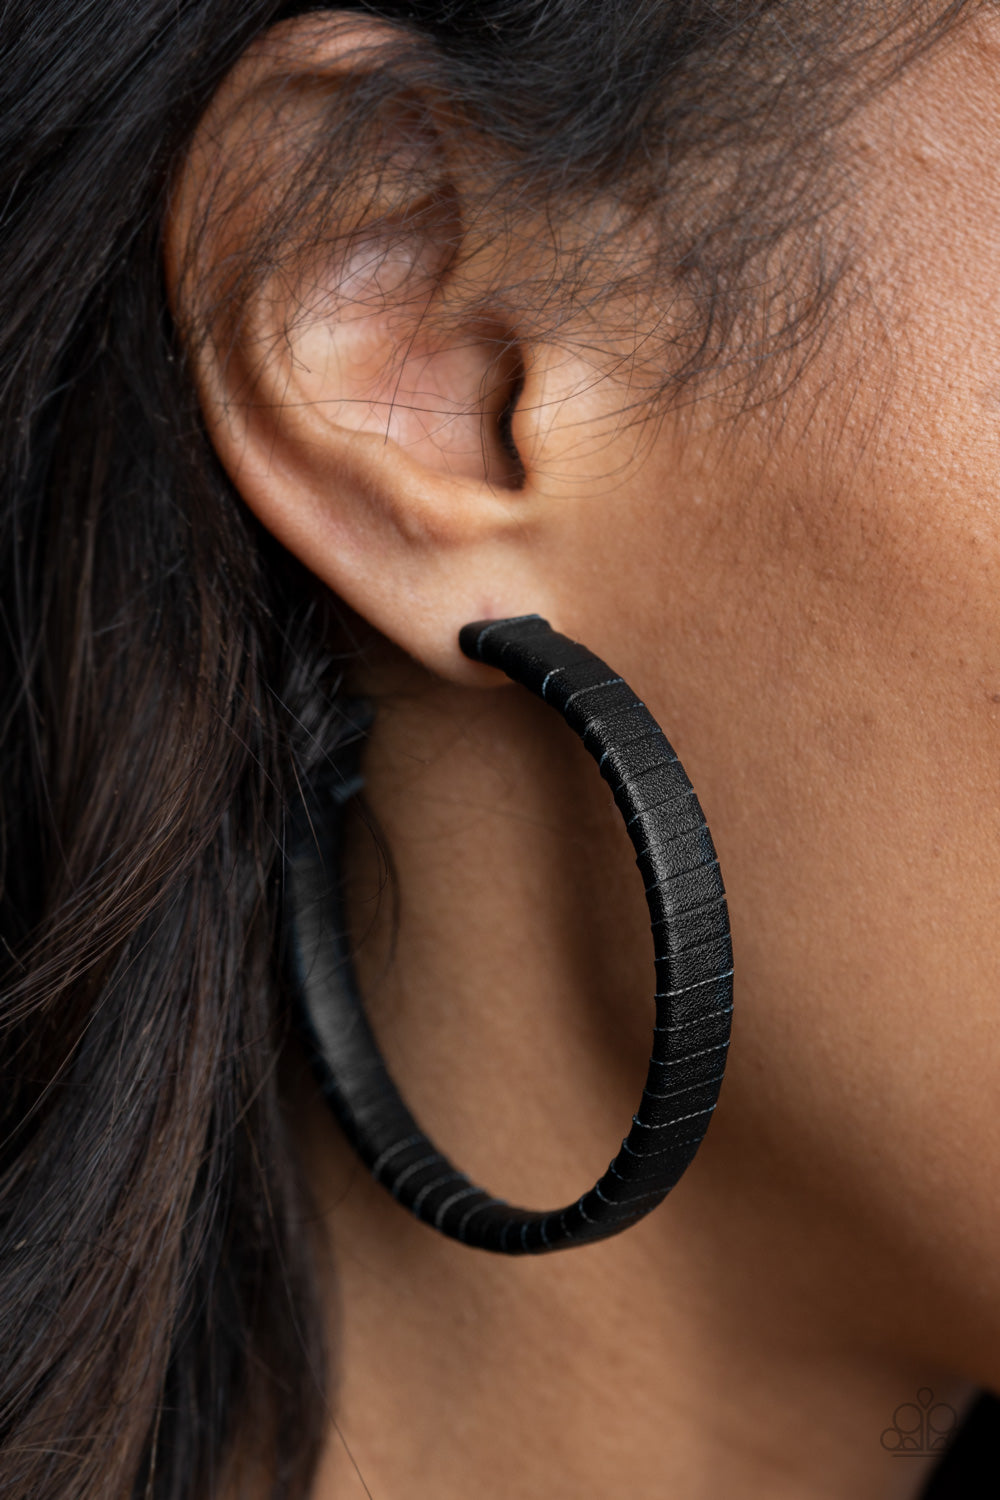 Leather-Clad Legend Black Hoop Earring - Paparazzi Accessories  A black leather lace wraps around a thick silver hoop, creating an edgy display. Earring attaches to a standard post fitting. Hoop measures approximately 2 1/2" in diameter.  All Paparazzi Accessories are lead free and nickel free!  Sold as one pair of hoop earrings.